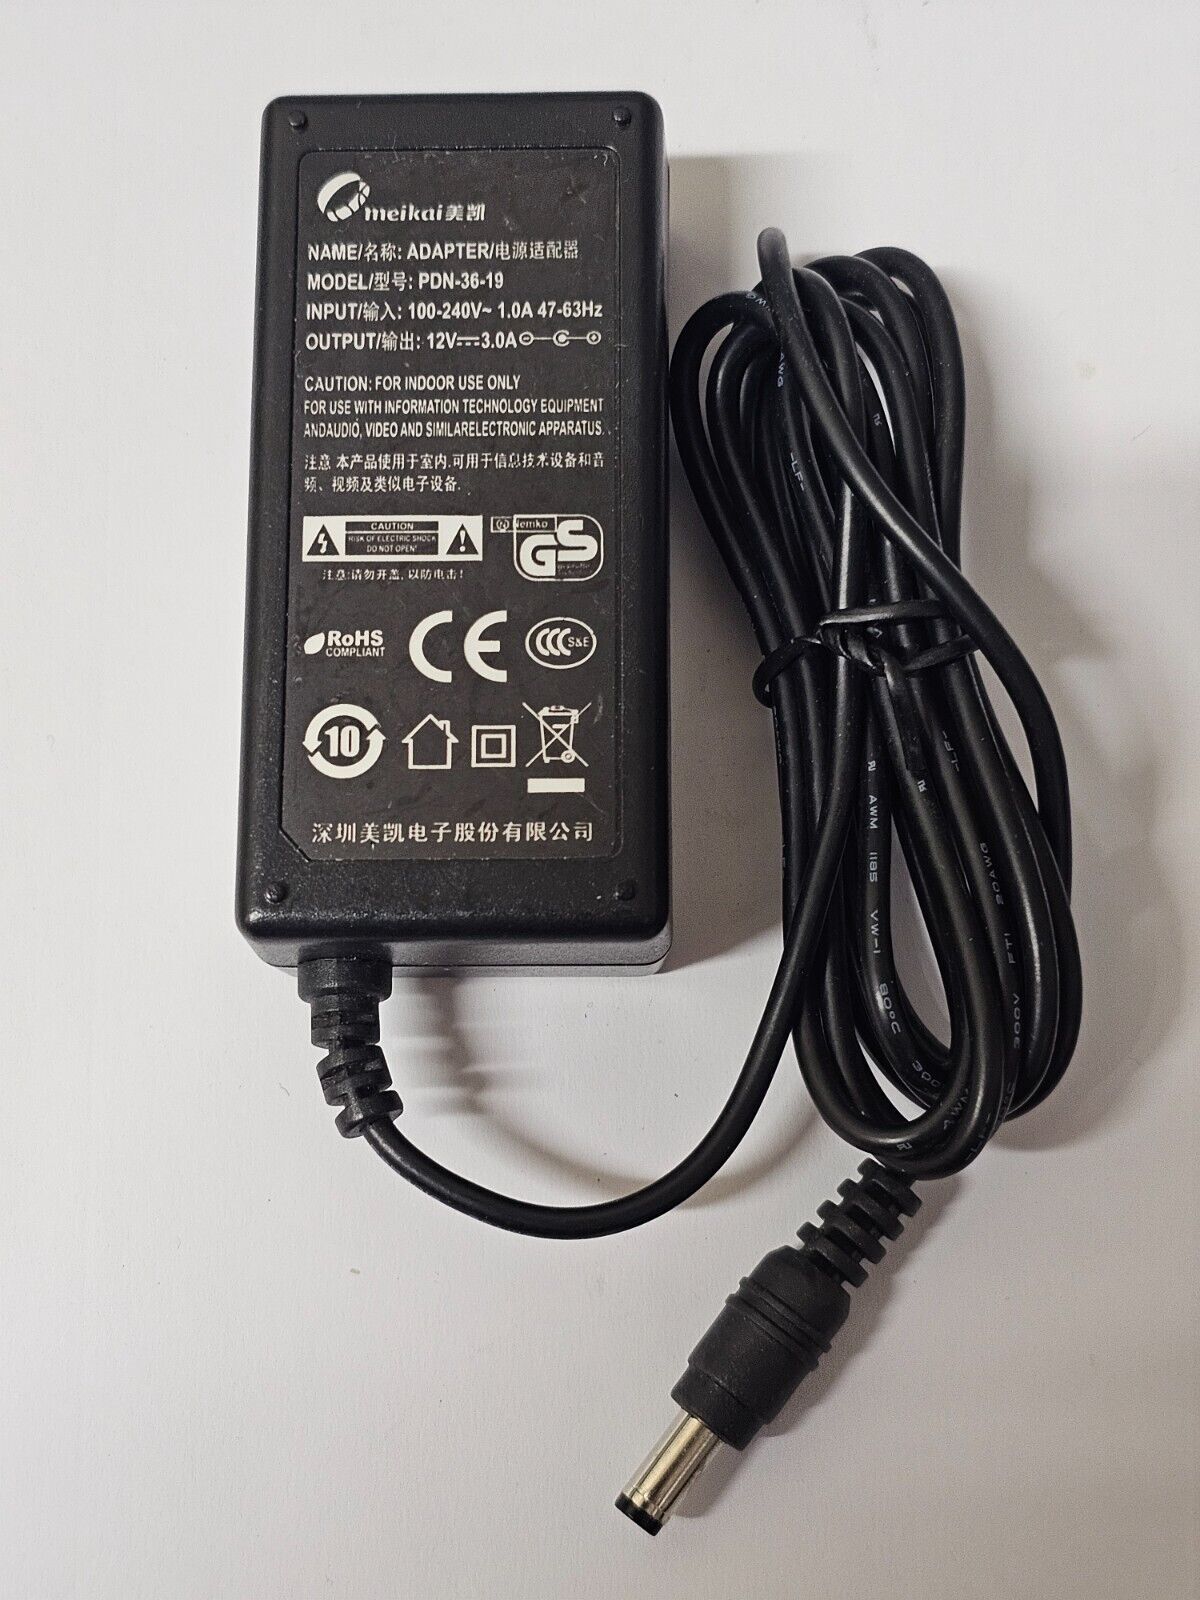 Genuine Meikai 12V 3.0A 36W 5.5mm x 2.1mm AC Power Adapter Charger PDN-36-19 Compatible Brand Universal Type Power Adap